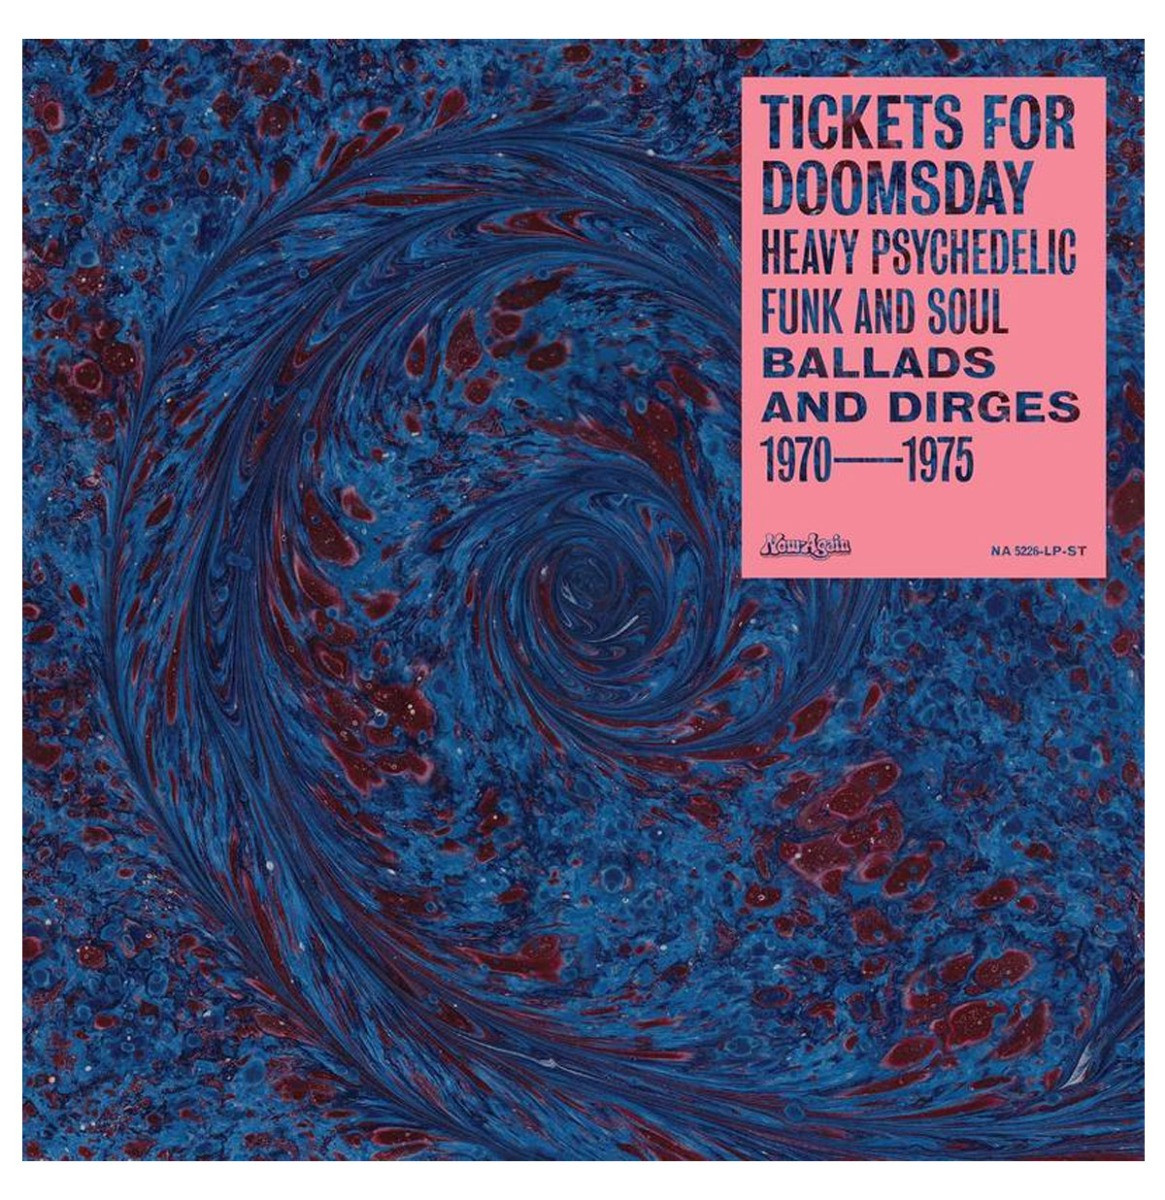 Various Artists - Tickets For Doomsday: Heavy Psychedelic Funk, Soul, Ballads & Dirges 1970-1975 LP (Record Store Day Black Friday)